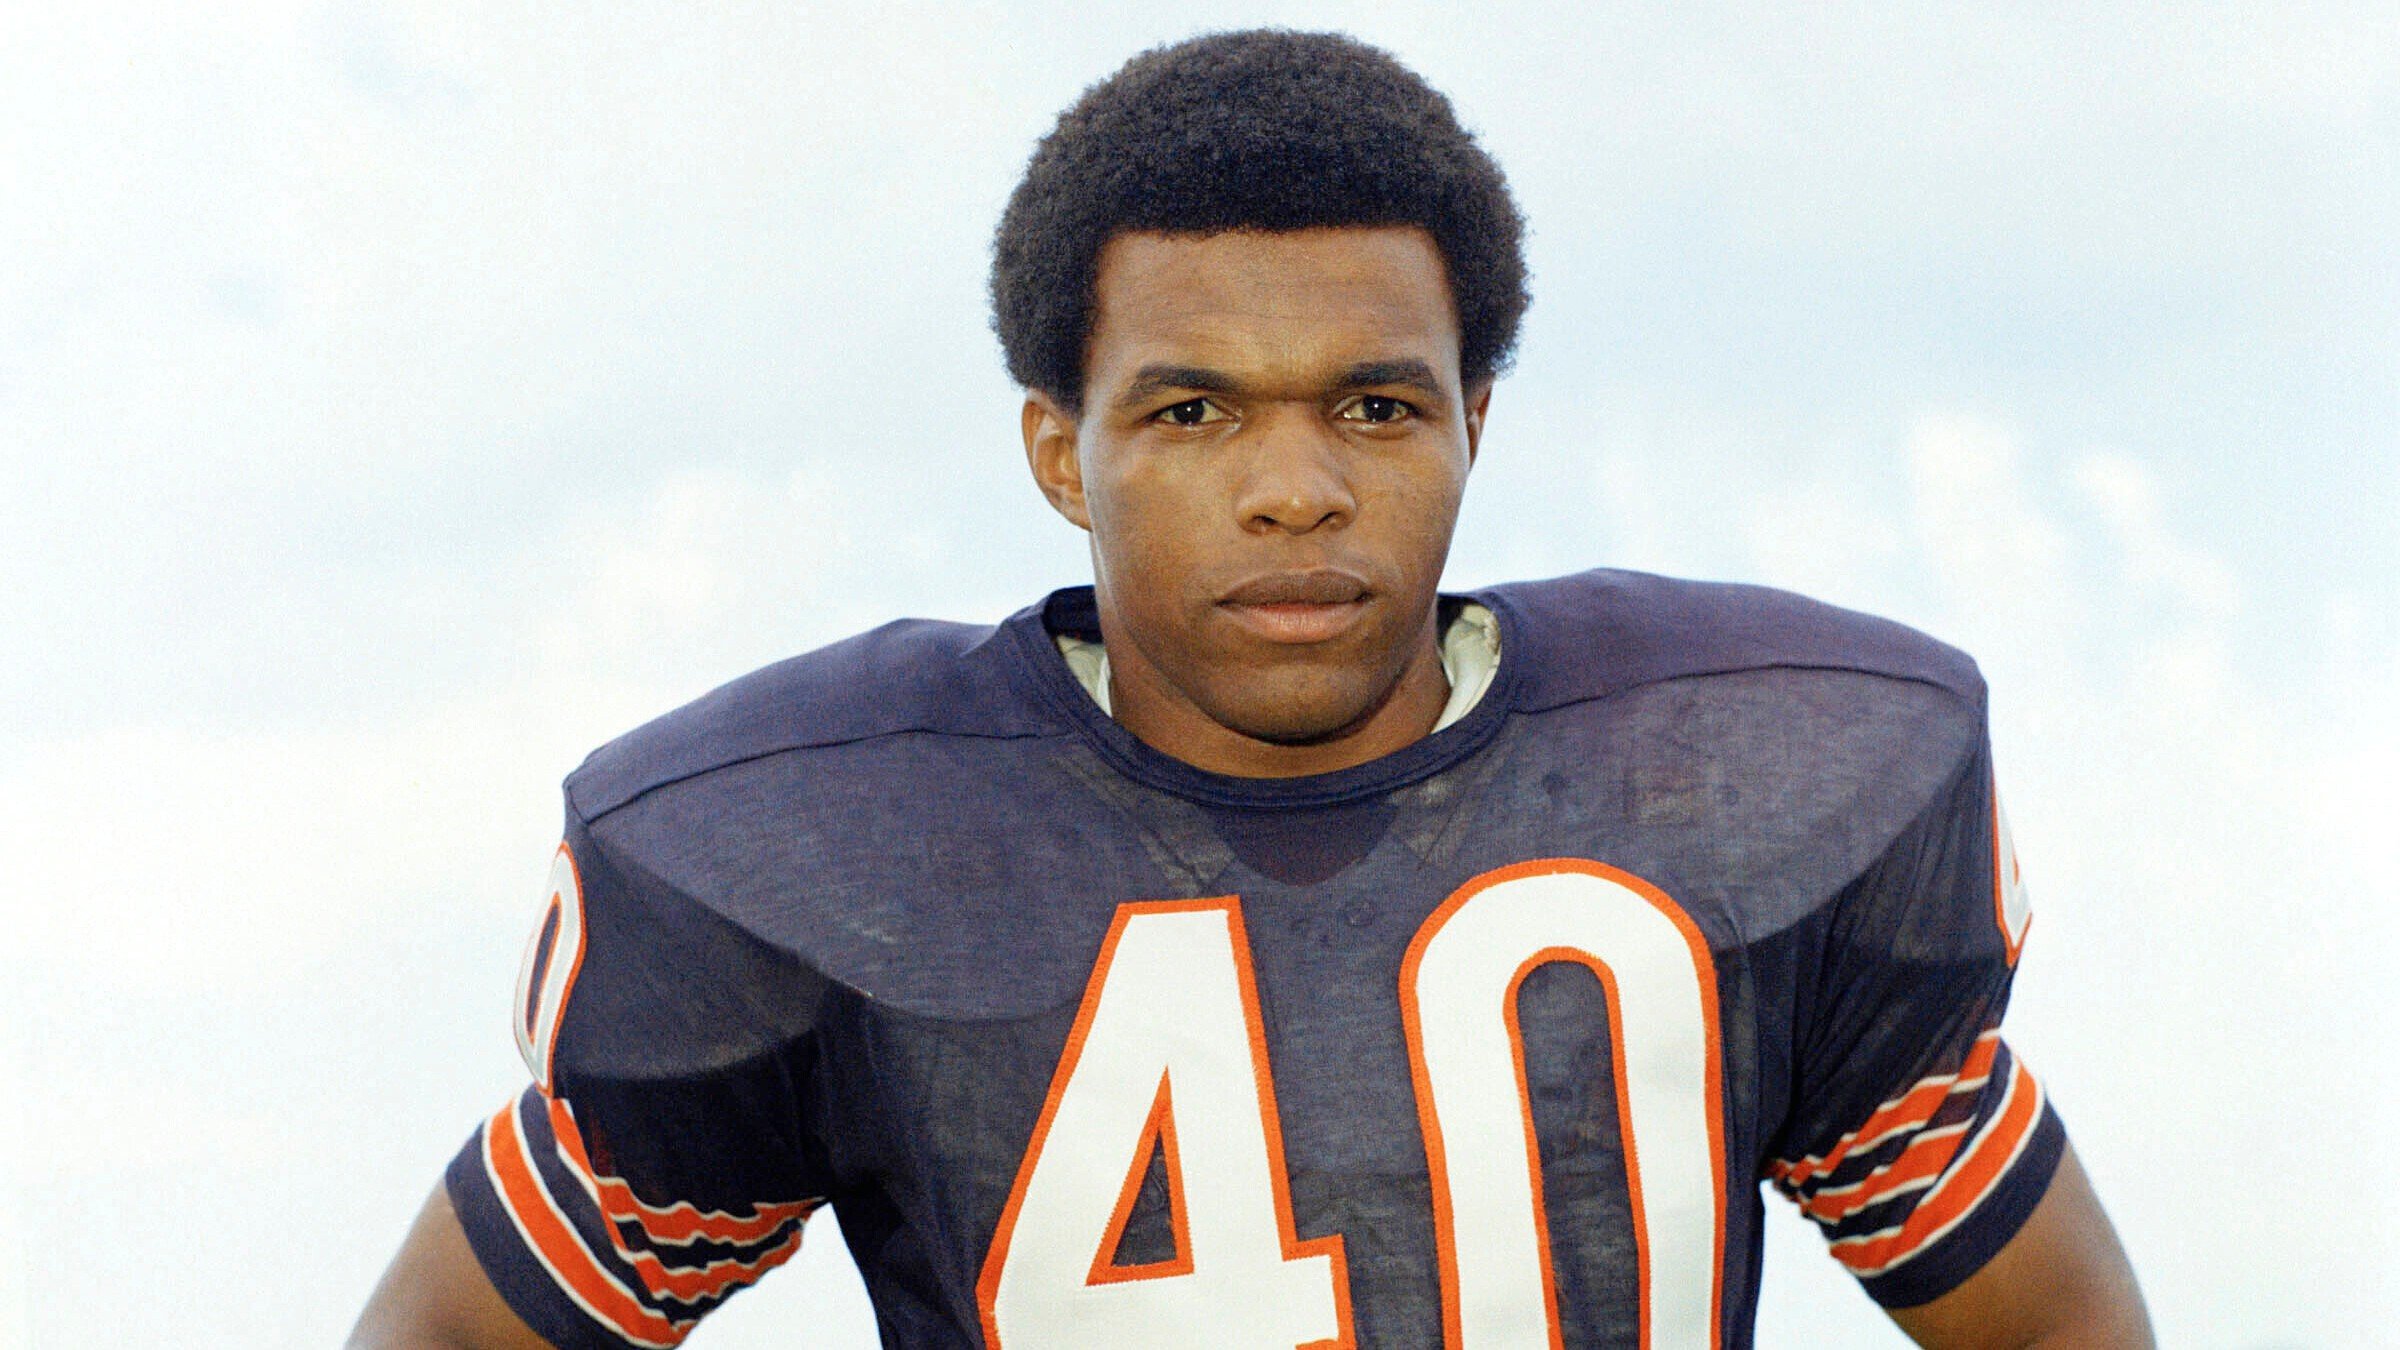 Gale Sayers death: Bears legend, Hall of Famer dies at 77 - Sports